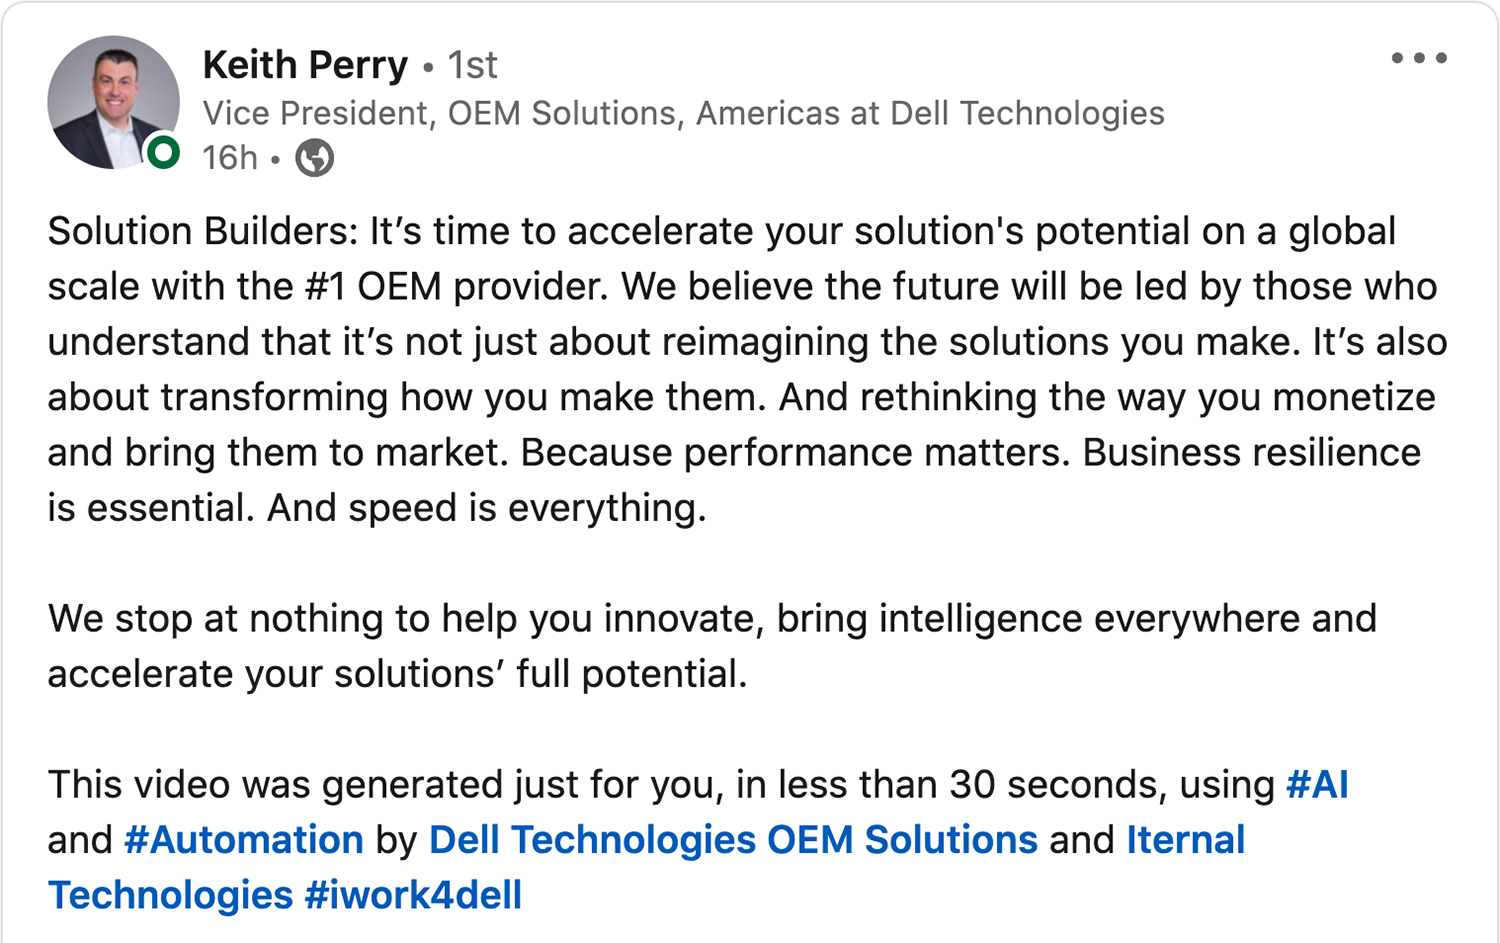 Dell Technologies and Iternal Technologies